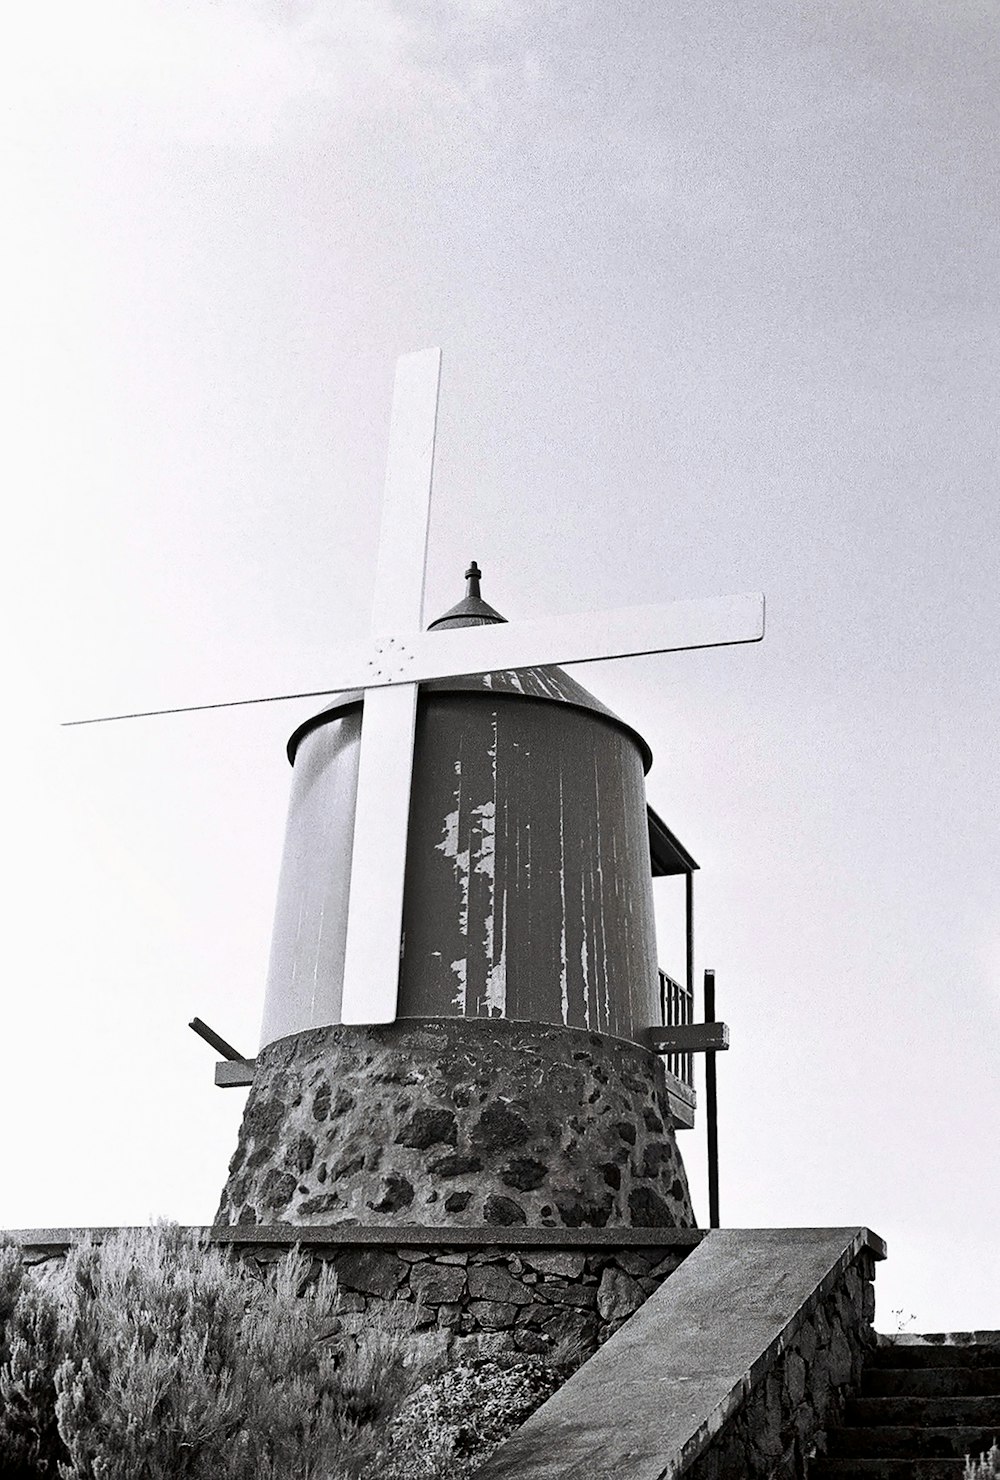 a black and white photo of a windmill